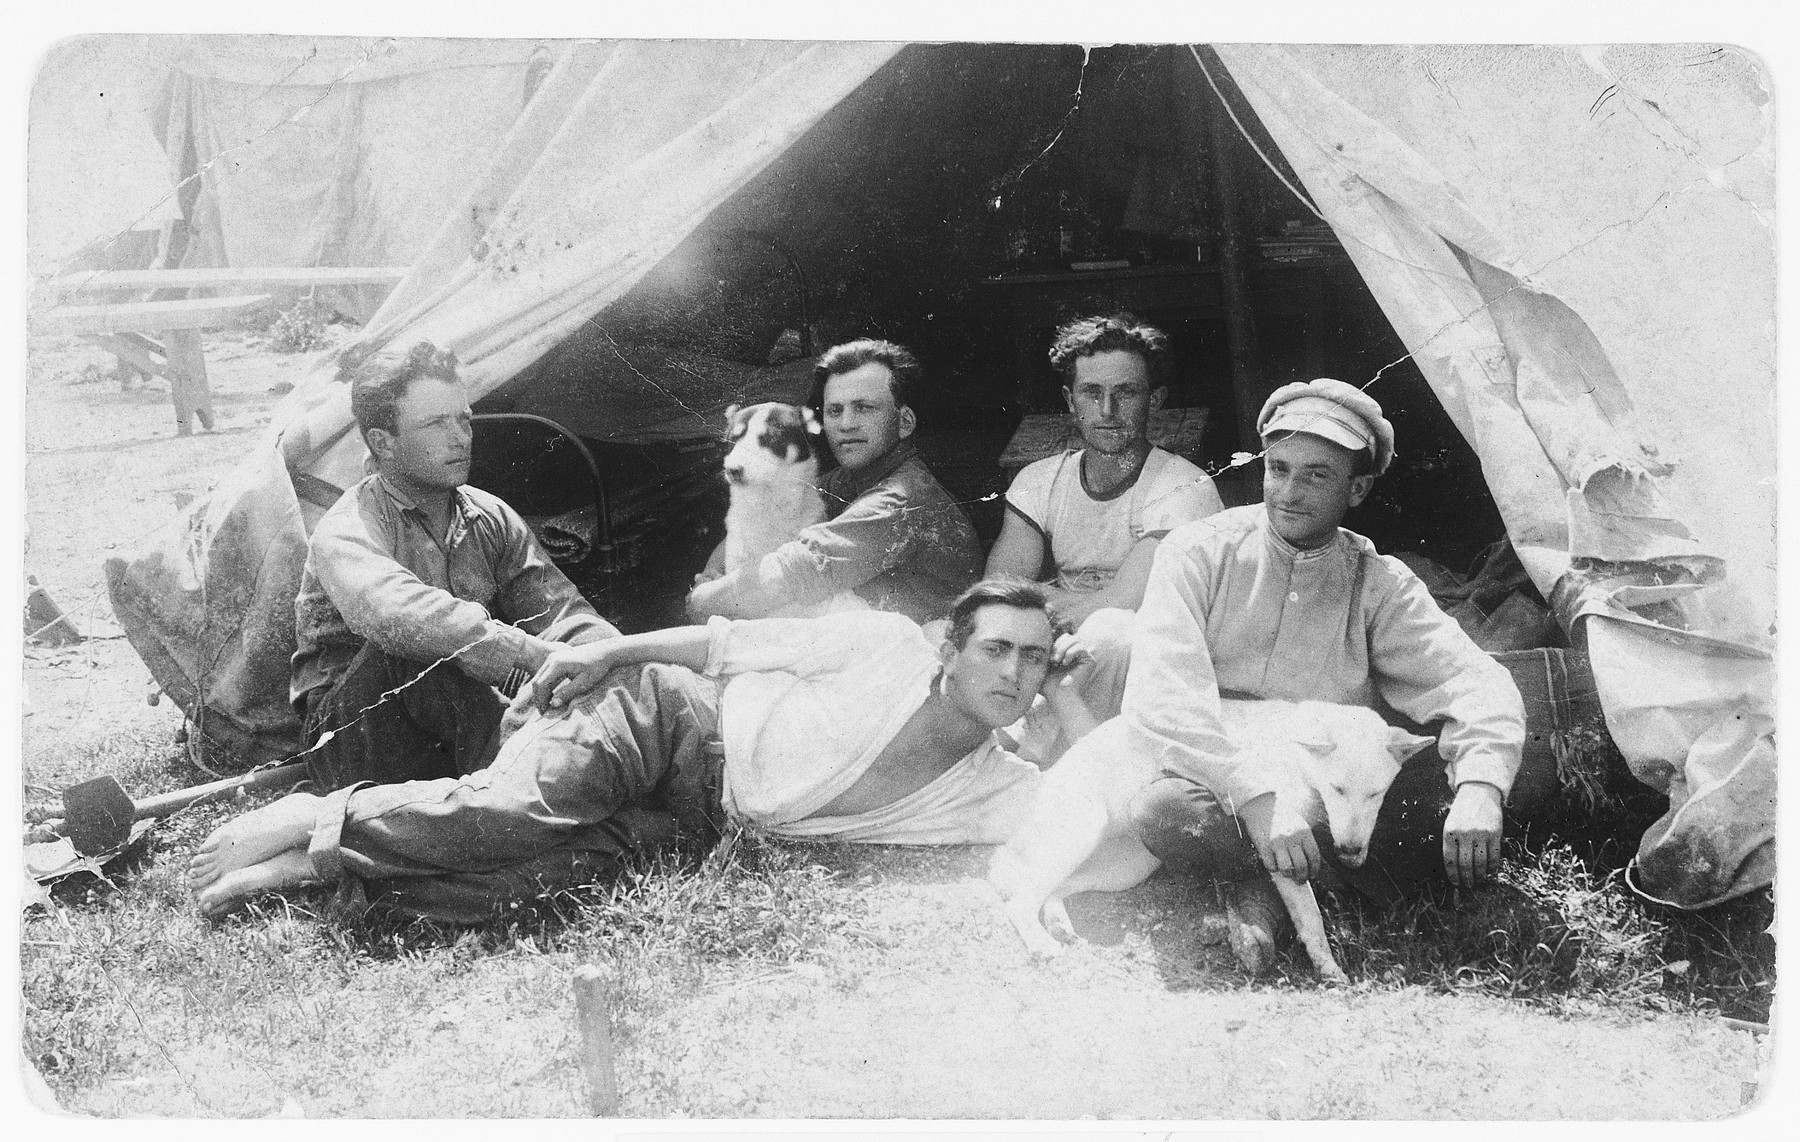 New pioneers pose next to their tent in a kibbutz in Palestine.

Among those pictured is Avraham Wagner.